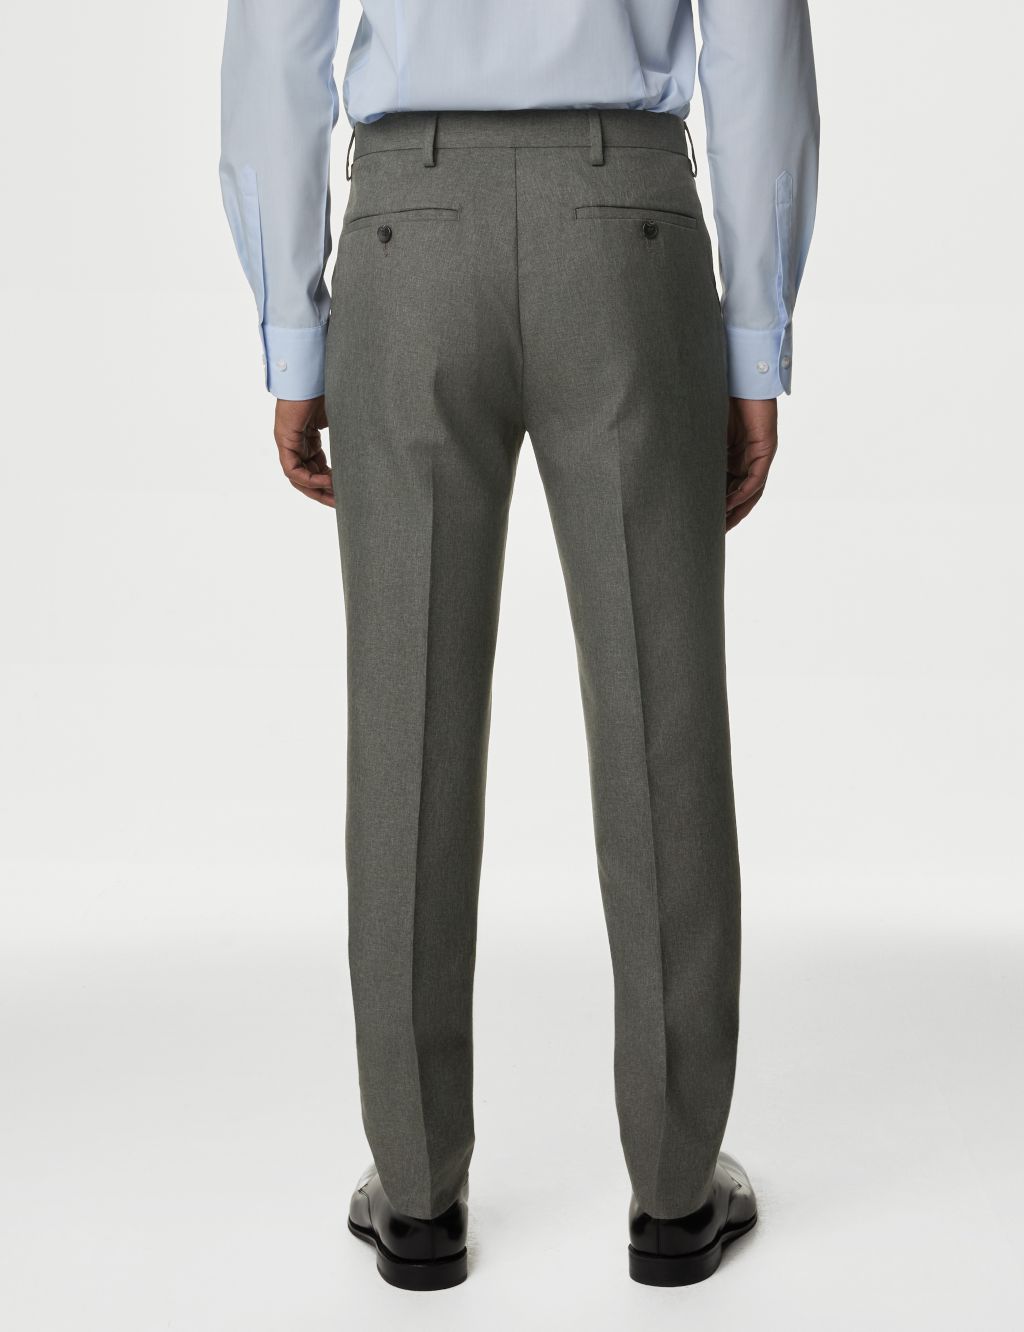 Skinny Fit Trousers image 5